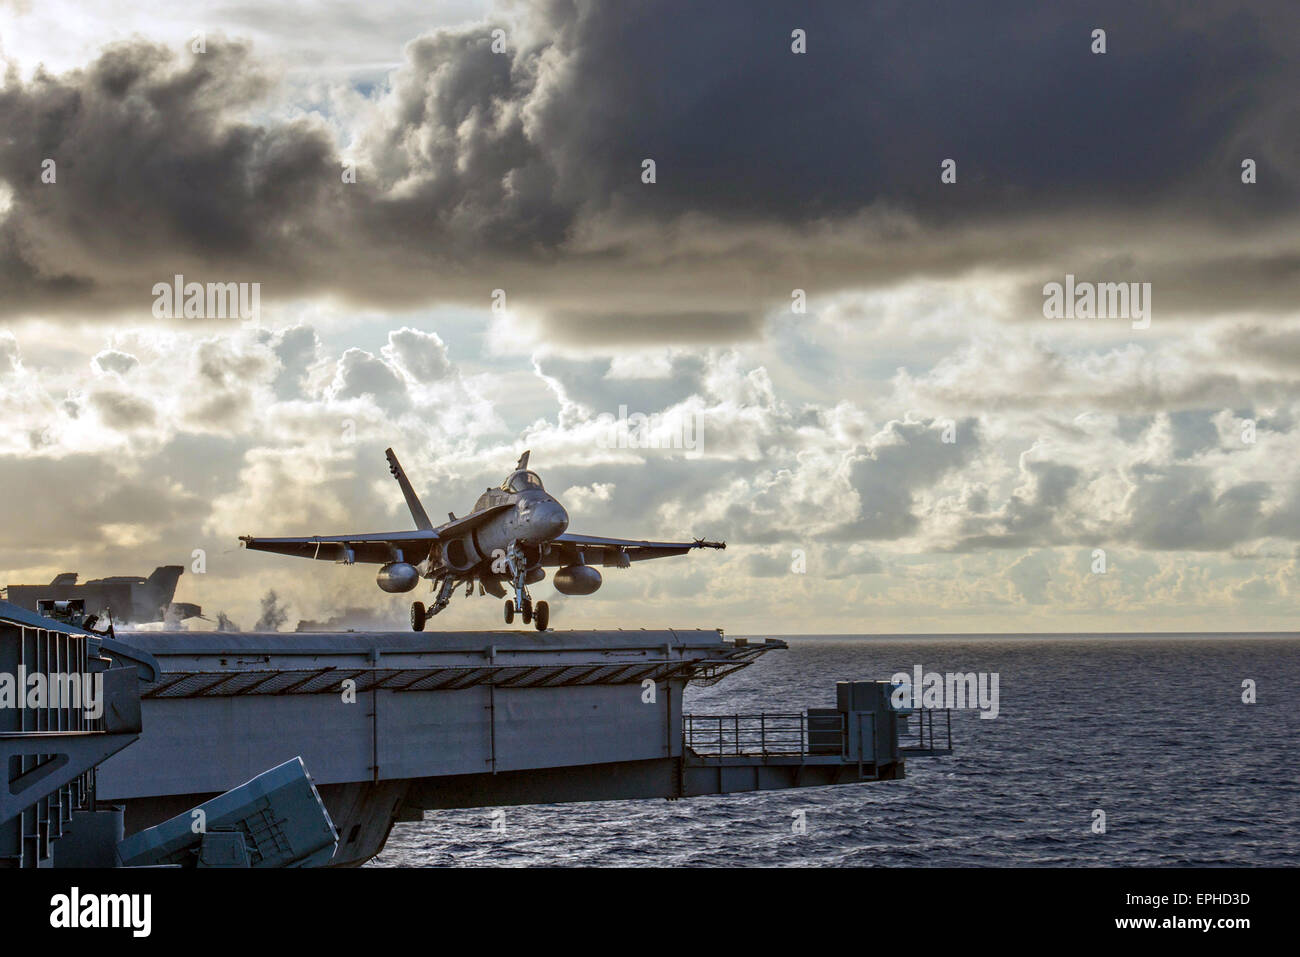 A U.S Navy F/A-18C Super Hornet fighter aircraft launches from the flight deck of the nuclear Nimitz-class aircraft carrier USS Carl Vinson during during operations May 13, 2015 in the Celebus Sea, Philippines. Stock Photo